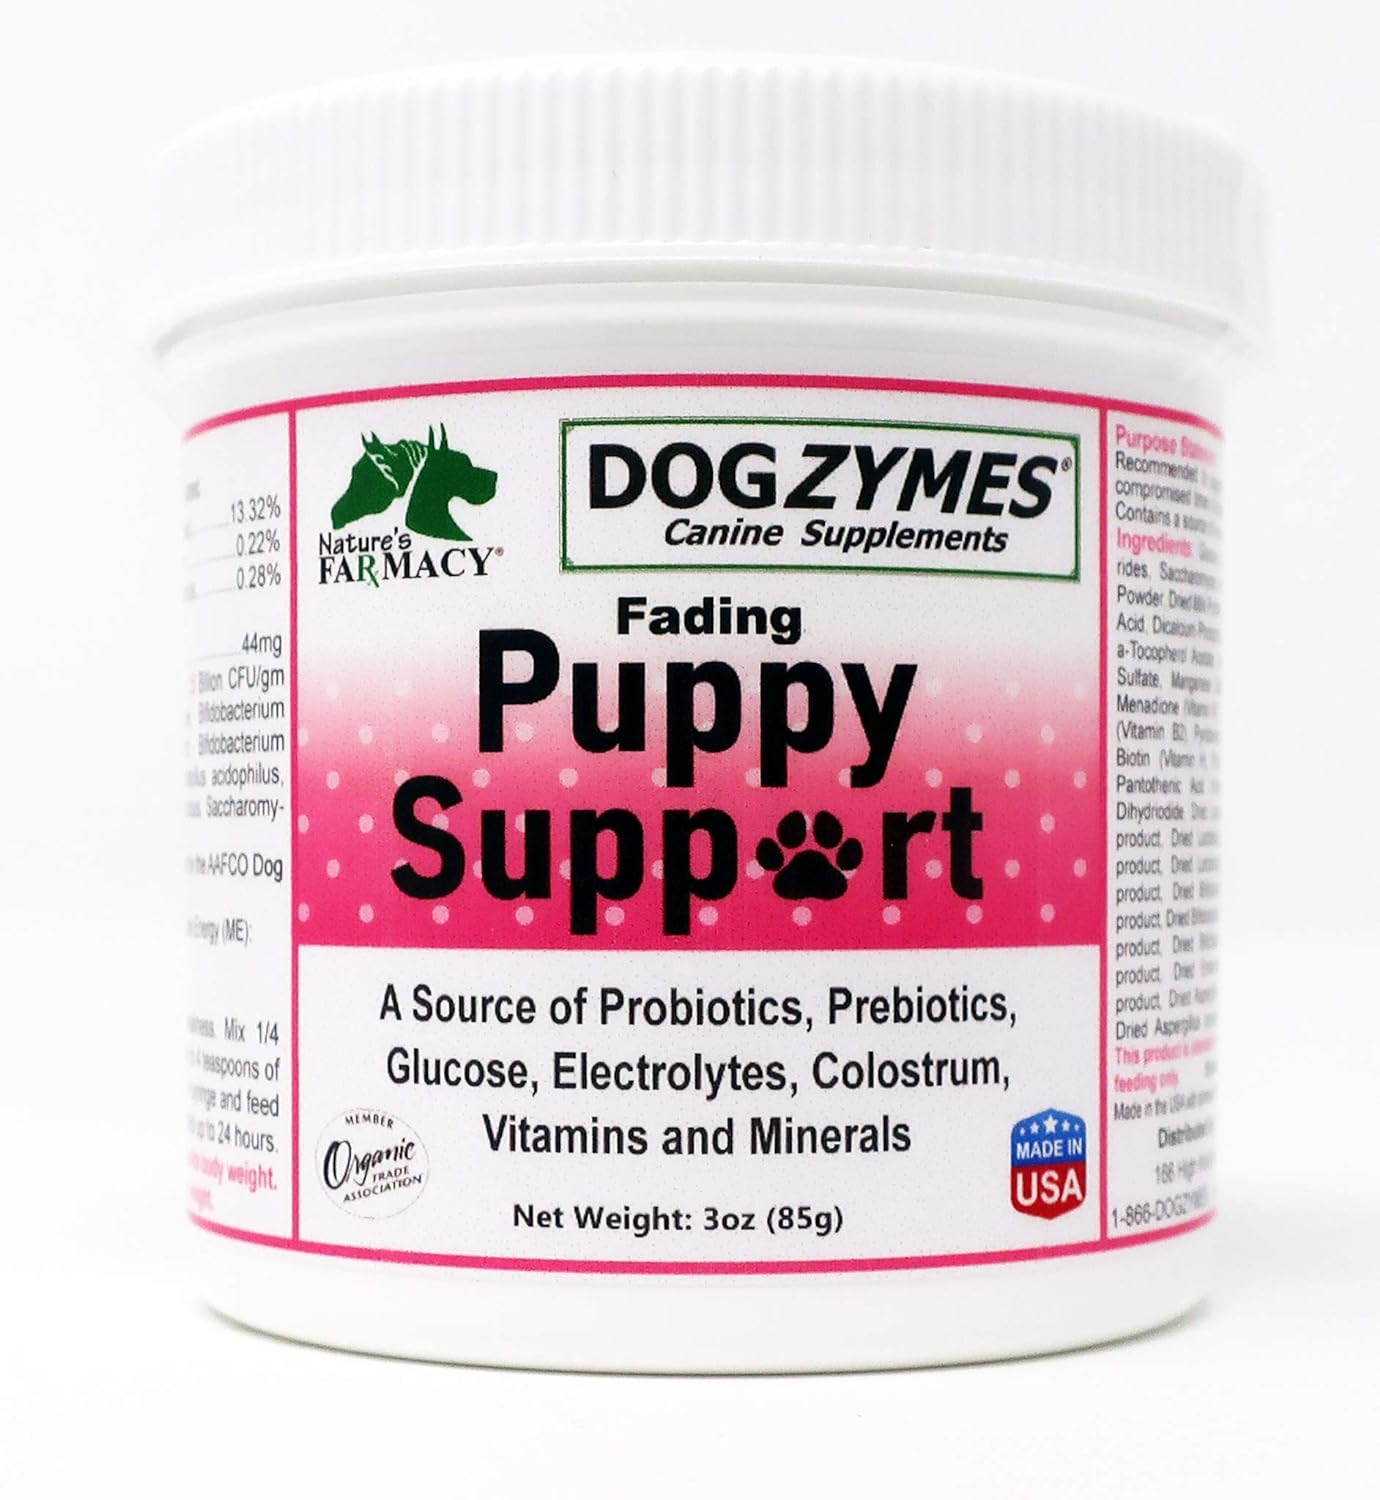 Dogzymes Fading Puppy Support Probiotics Prebiotics Enzymes Glucose Electrolytes Vitamins Minerals Mix 1 to 16 with Water (3 Ounce)